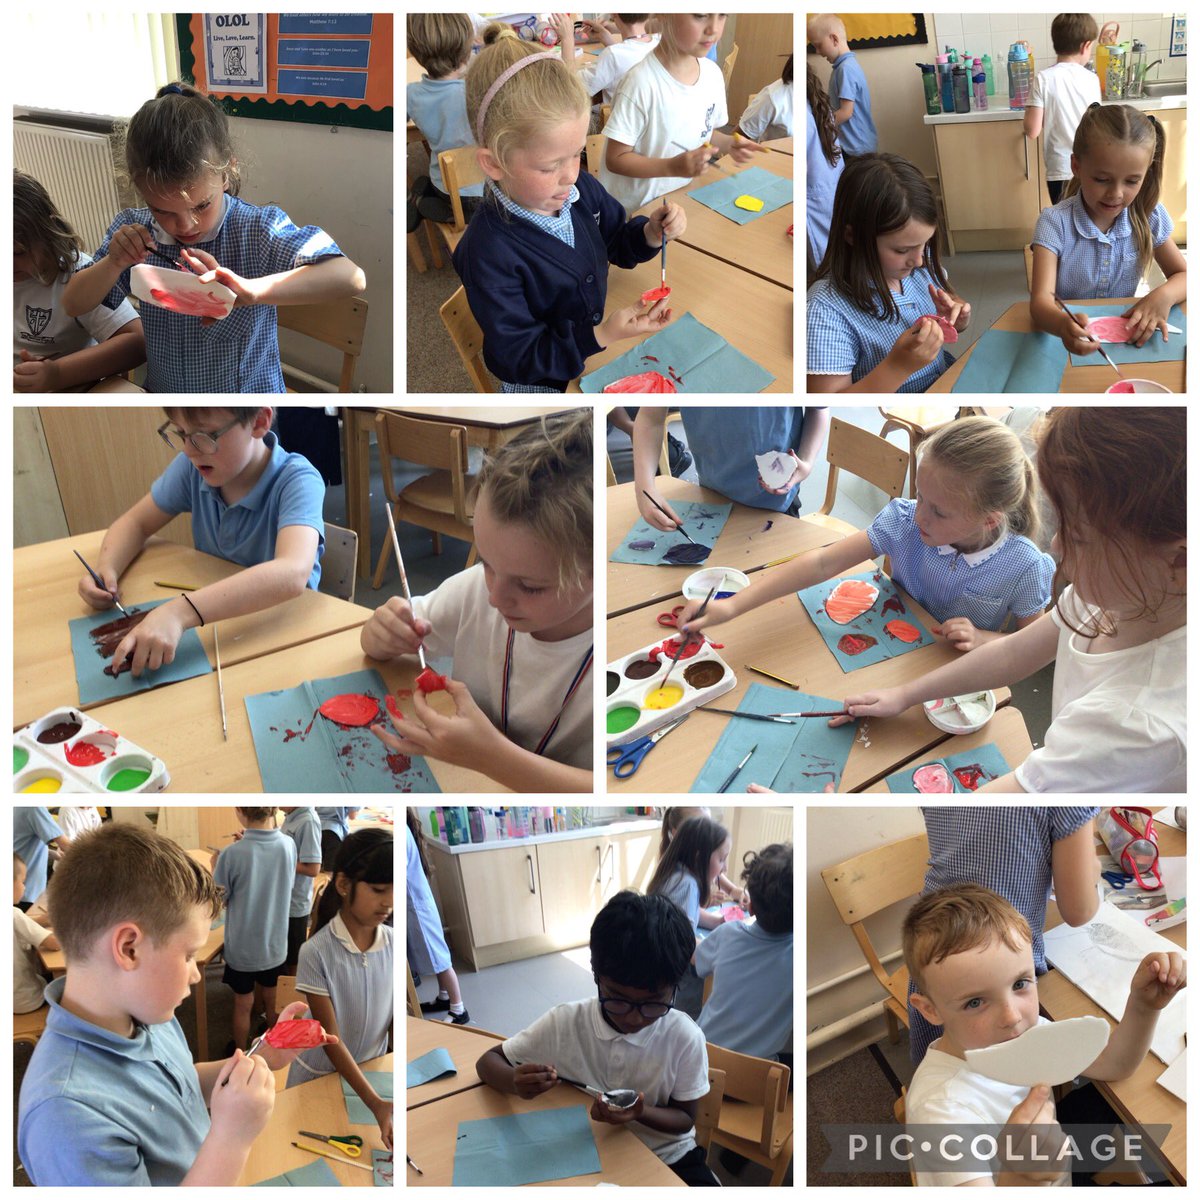 As we reach the final stage of our Create project, we have begun work on our bird sculptures! First step, create the body and head! #ArtOLOL @2G_MrGallagher @ololprimary_HT #MakeADifference